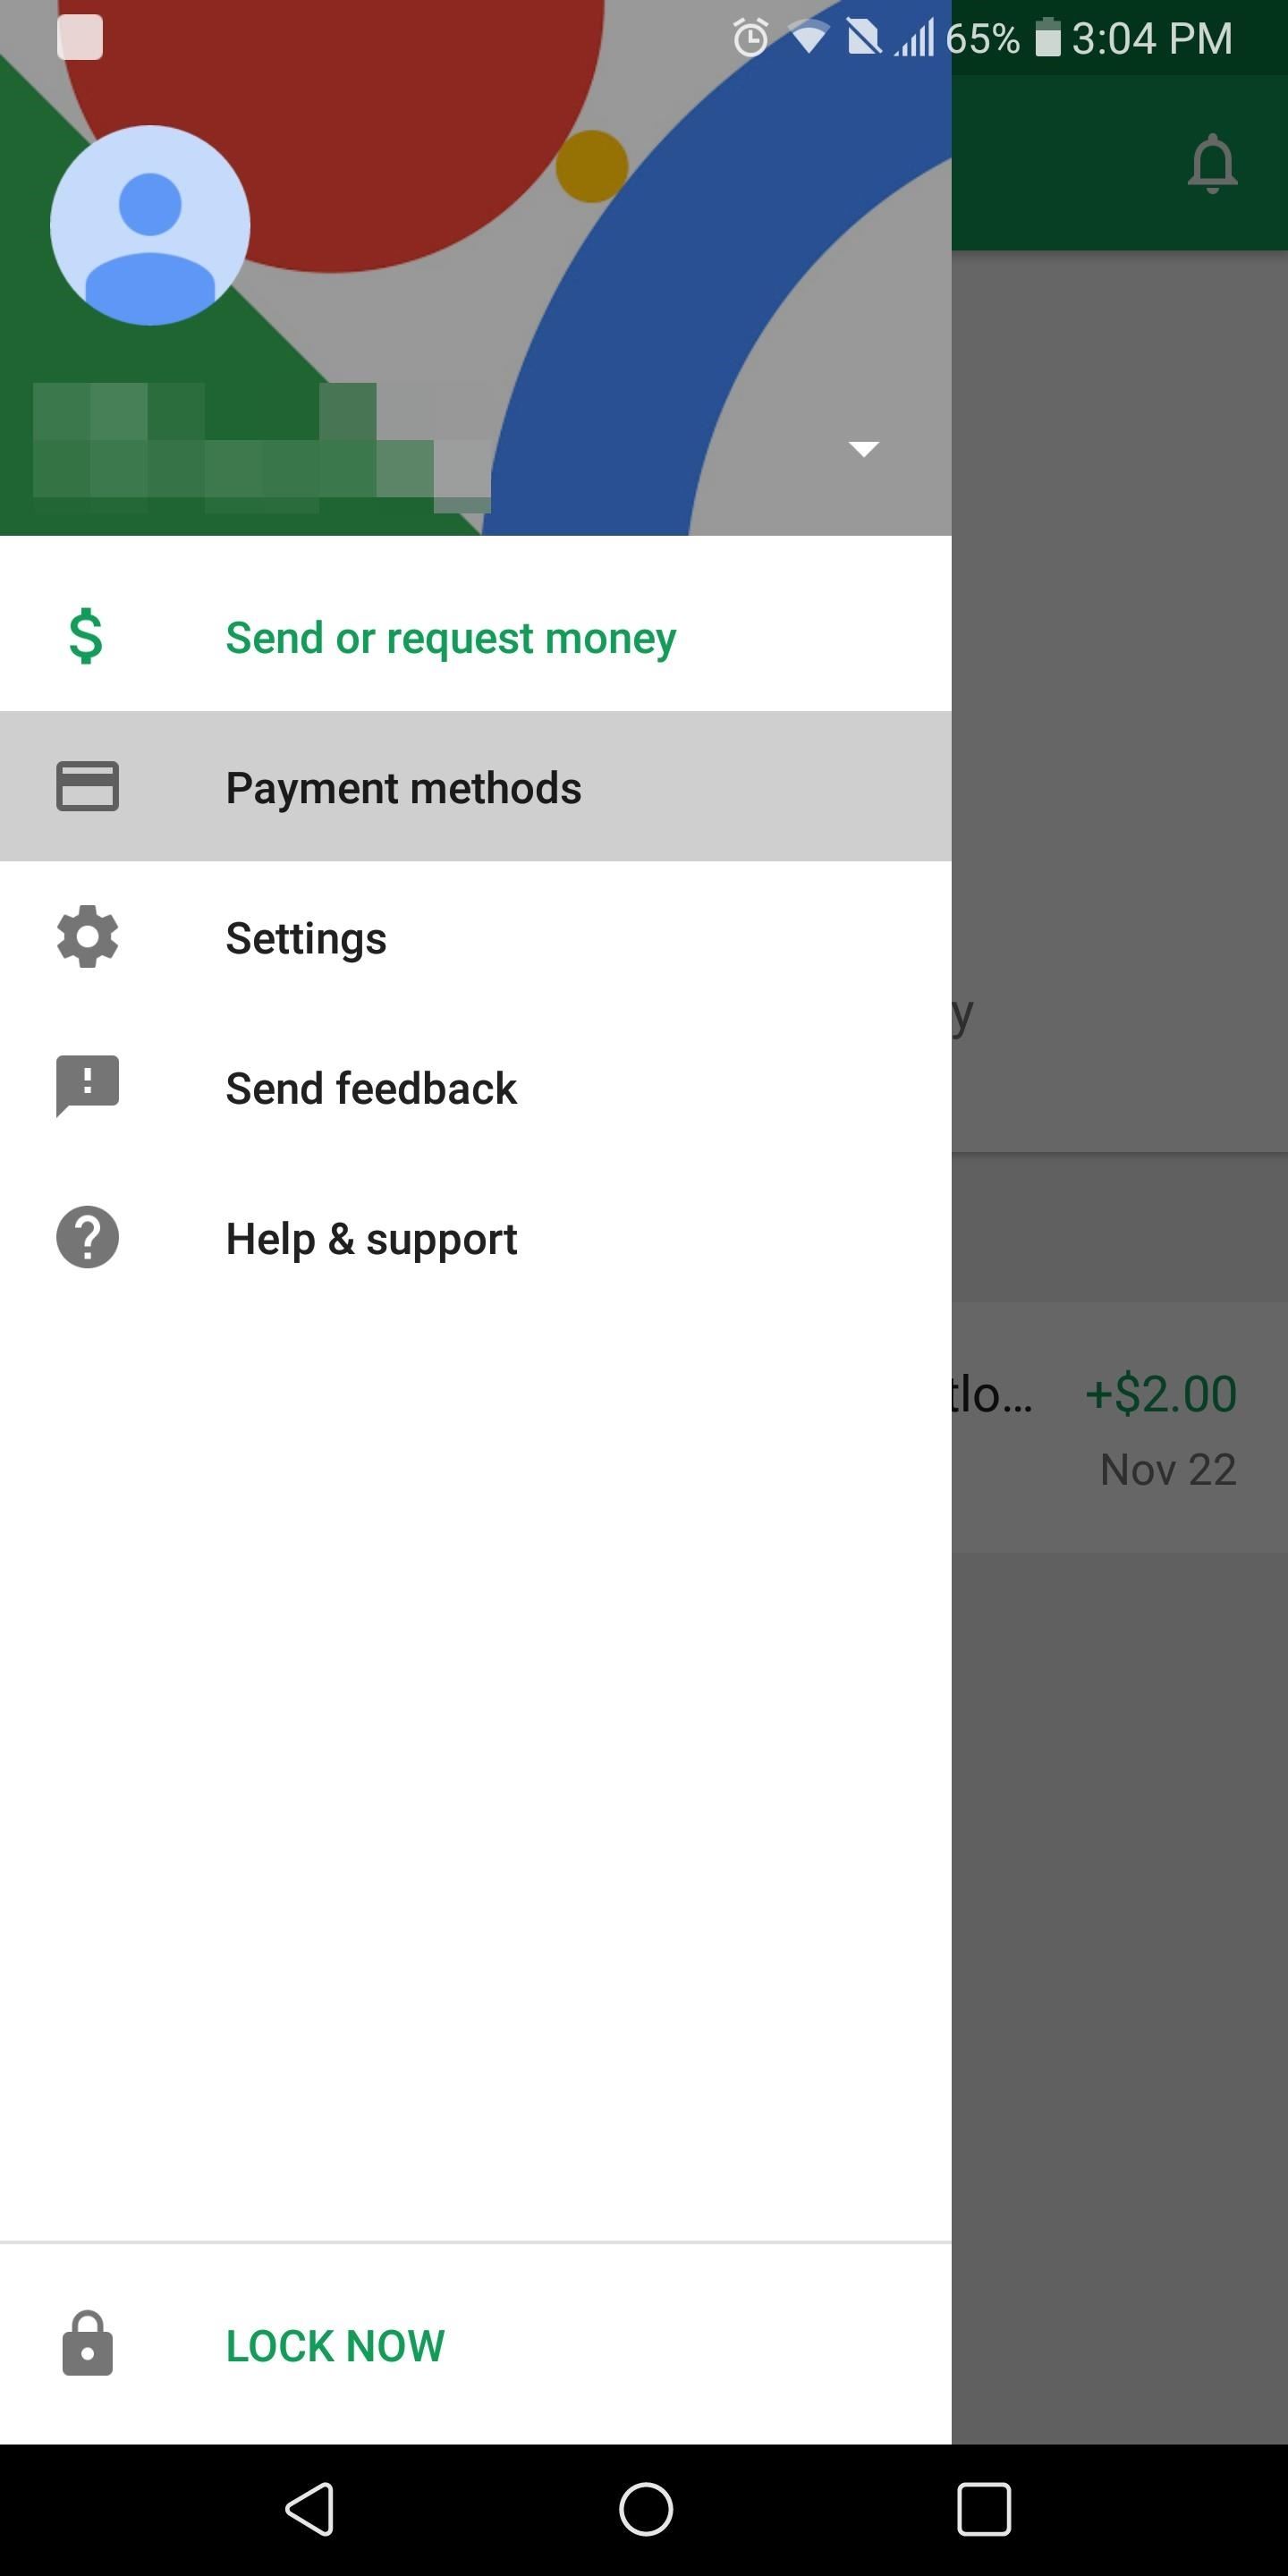 Gmail 101: How to Send & Receive Money with Android's Default Email App